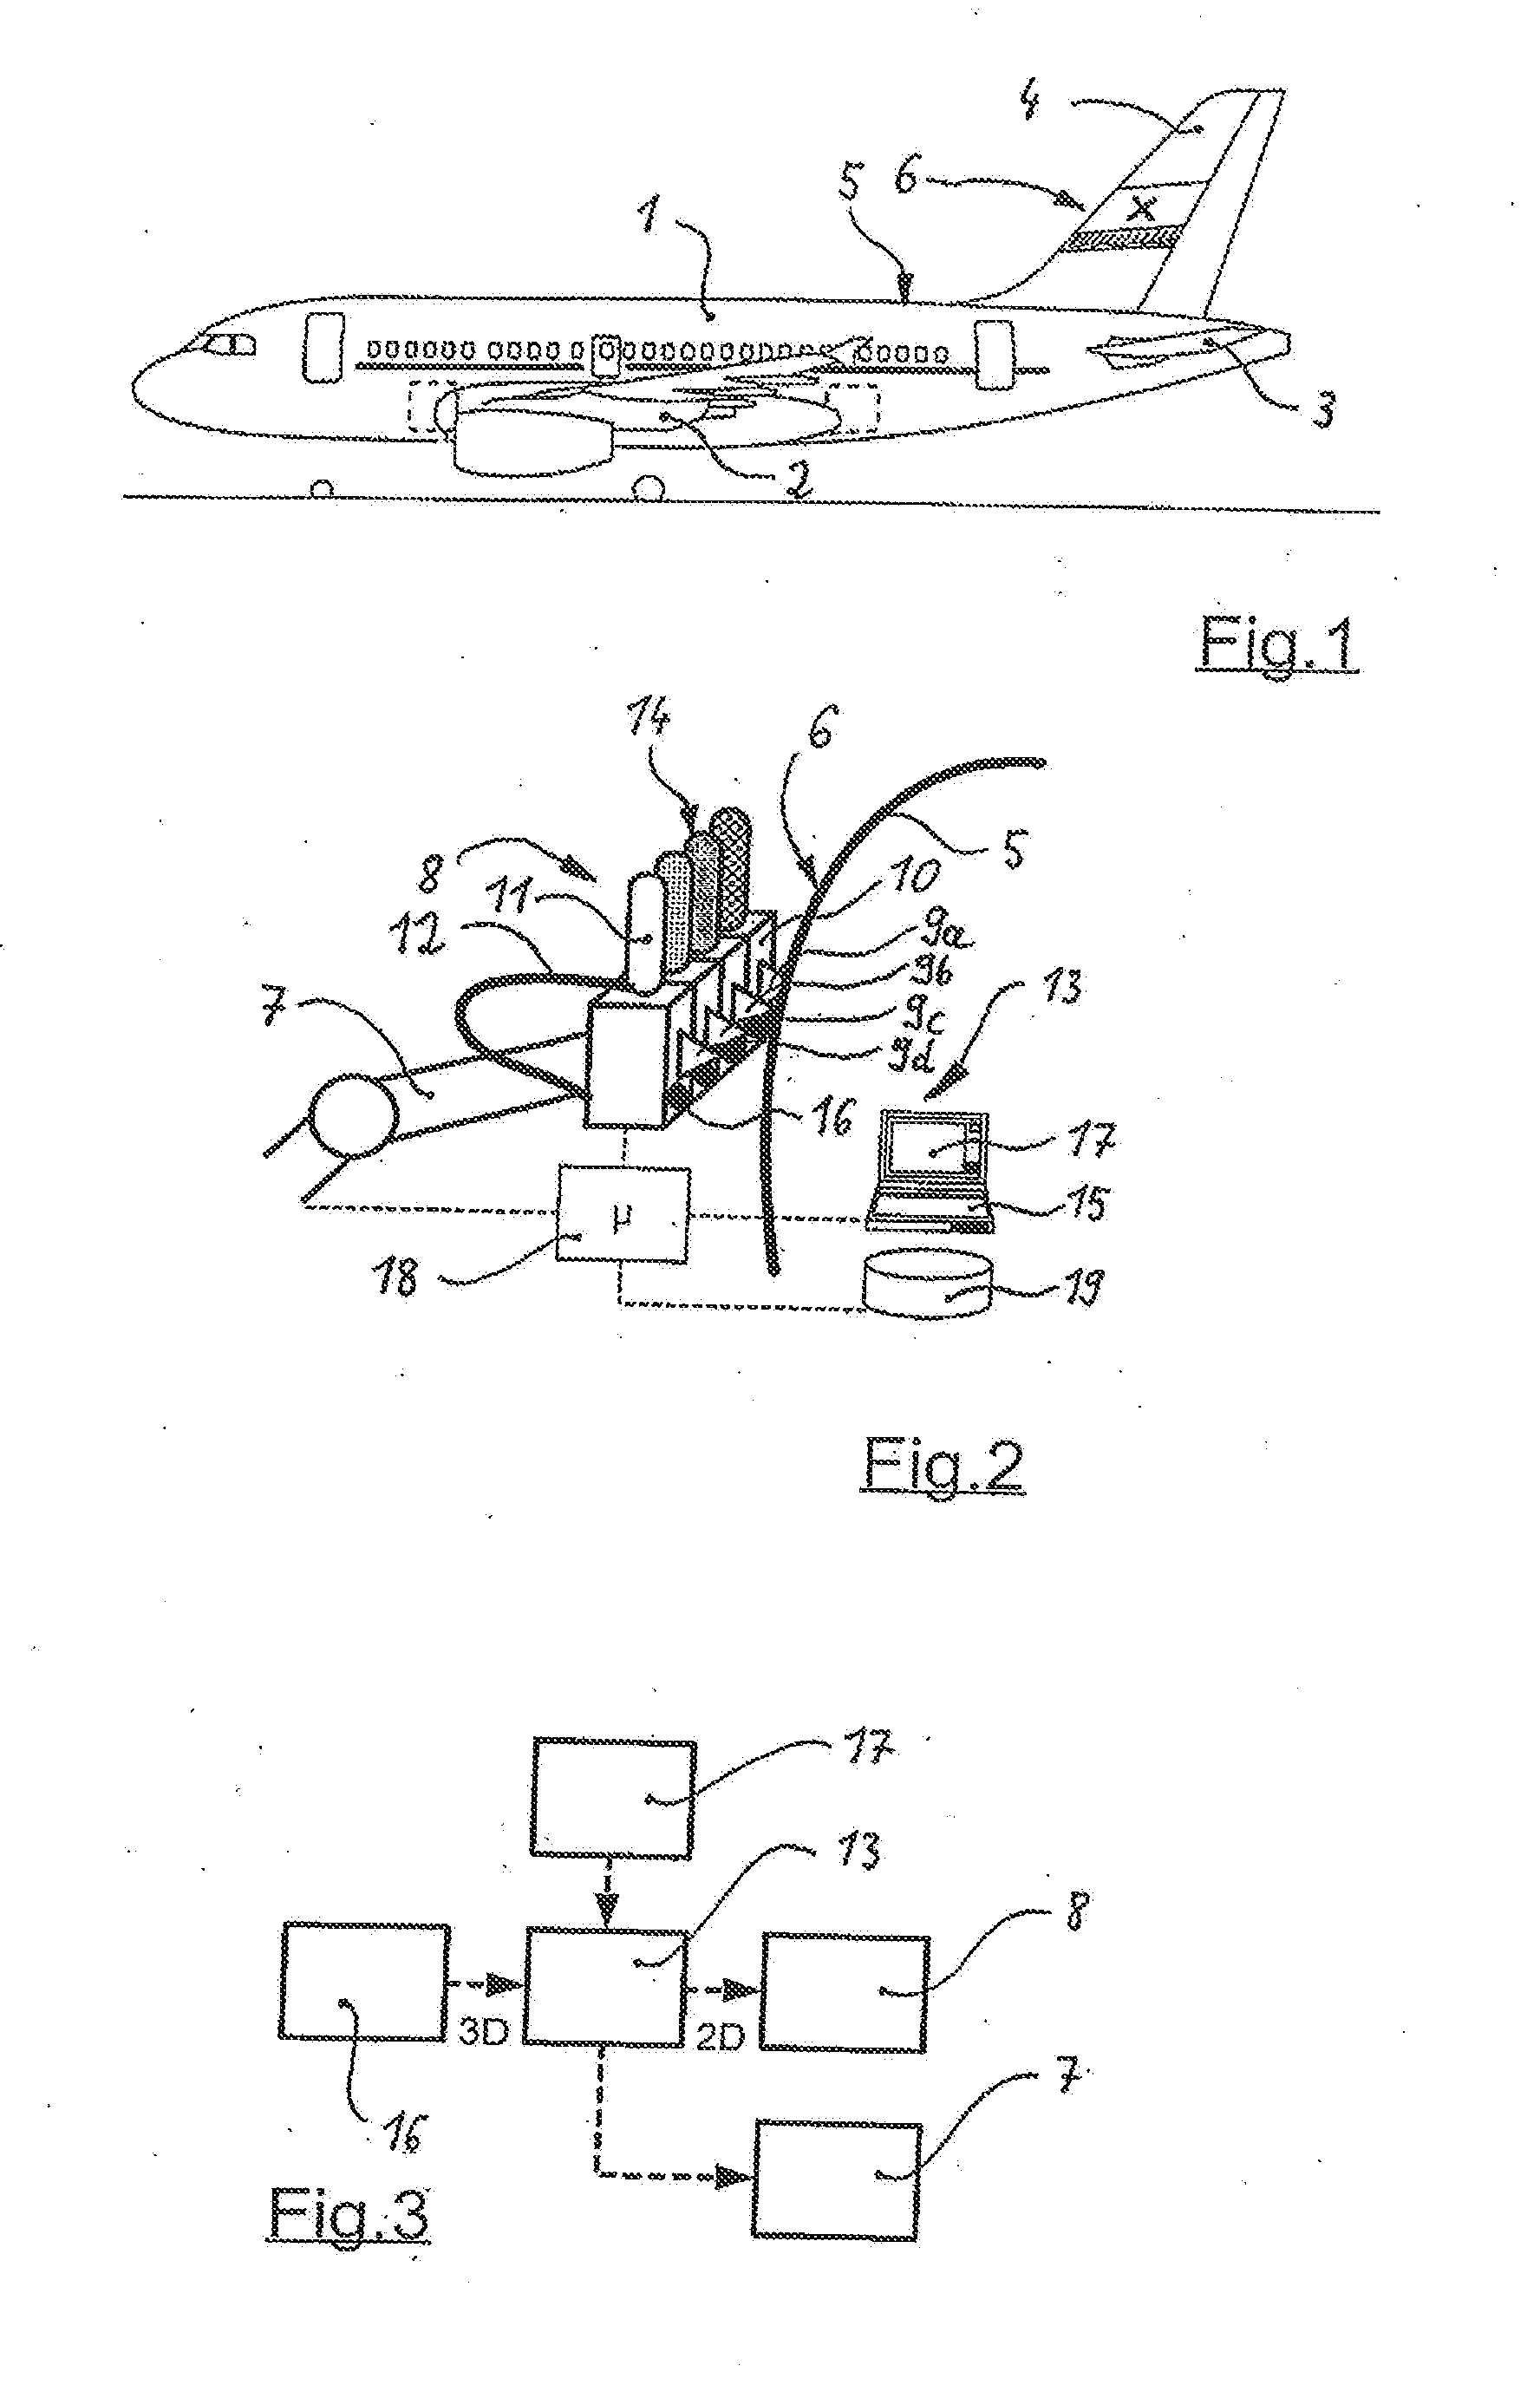 Device and method for painting curved outer surfaces of an aircraft